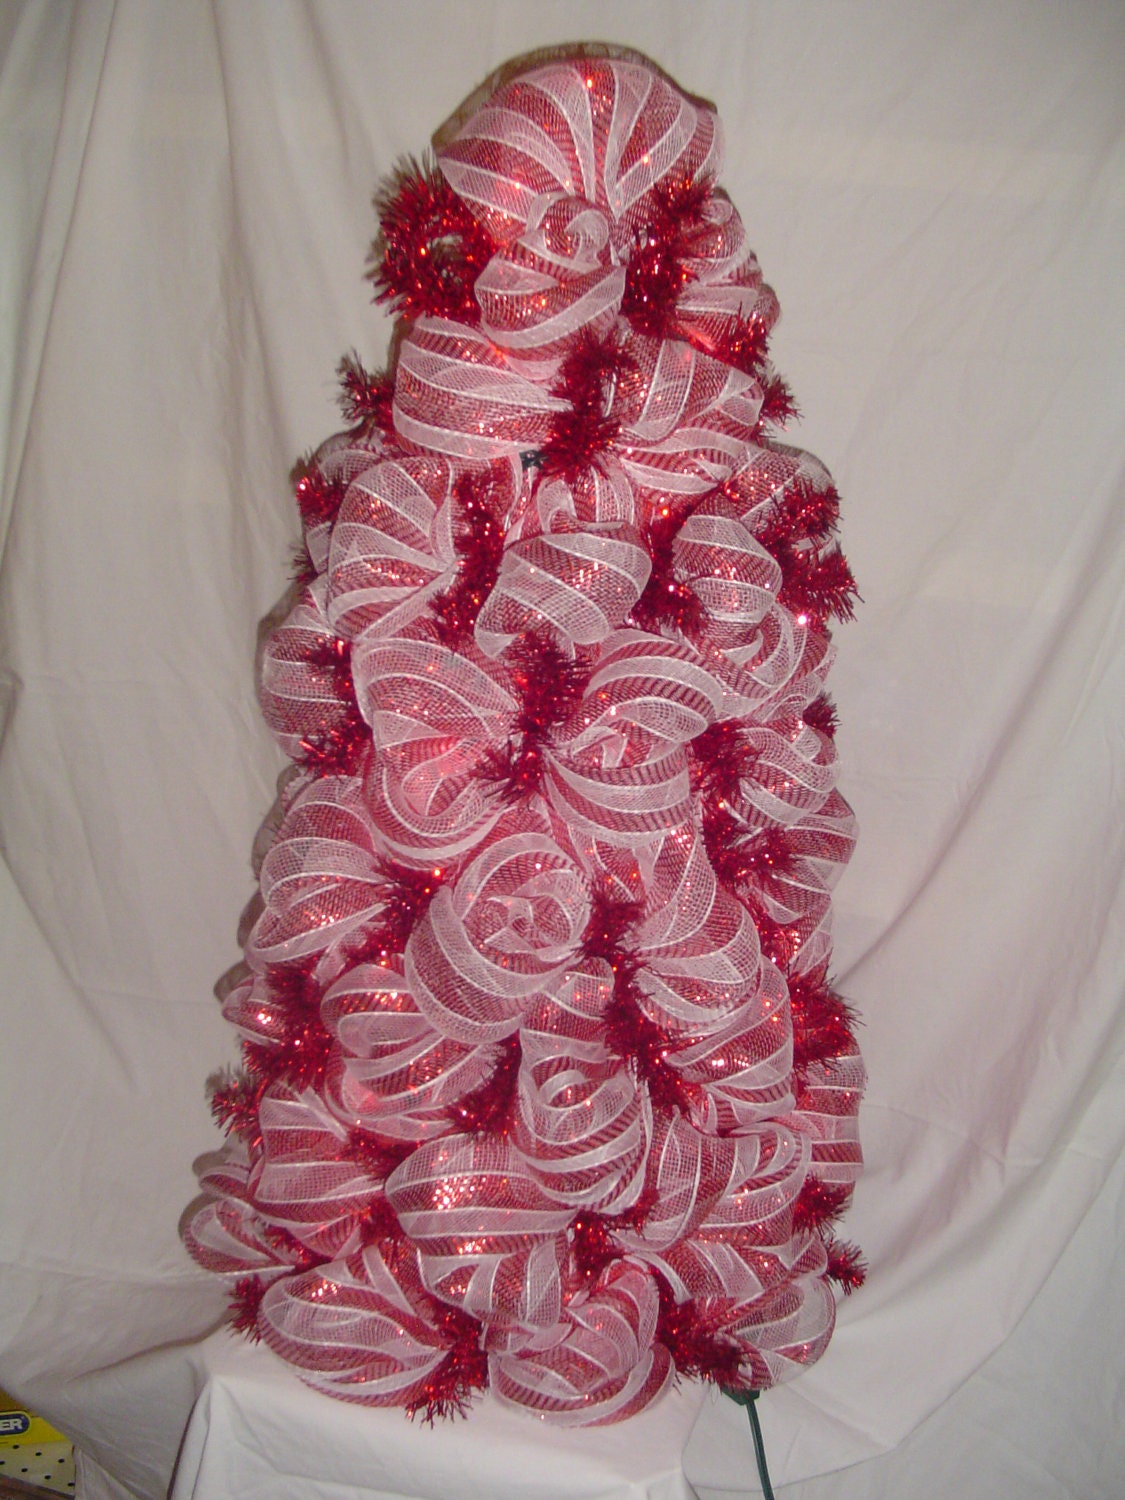 Pictures Of Christmas Trees Decorated With Deco Mesh